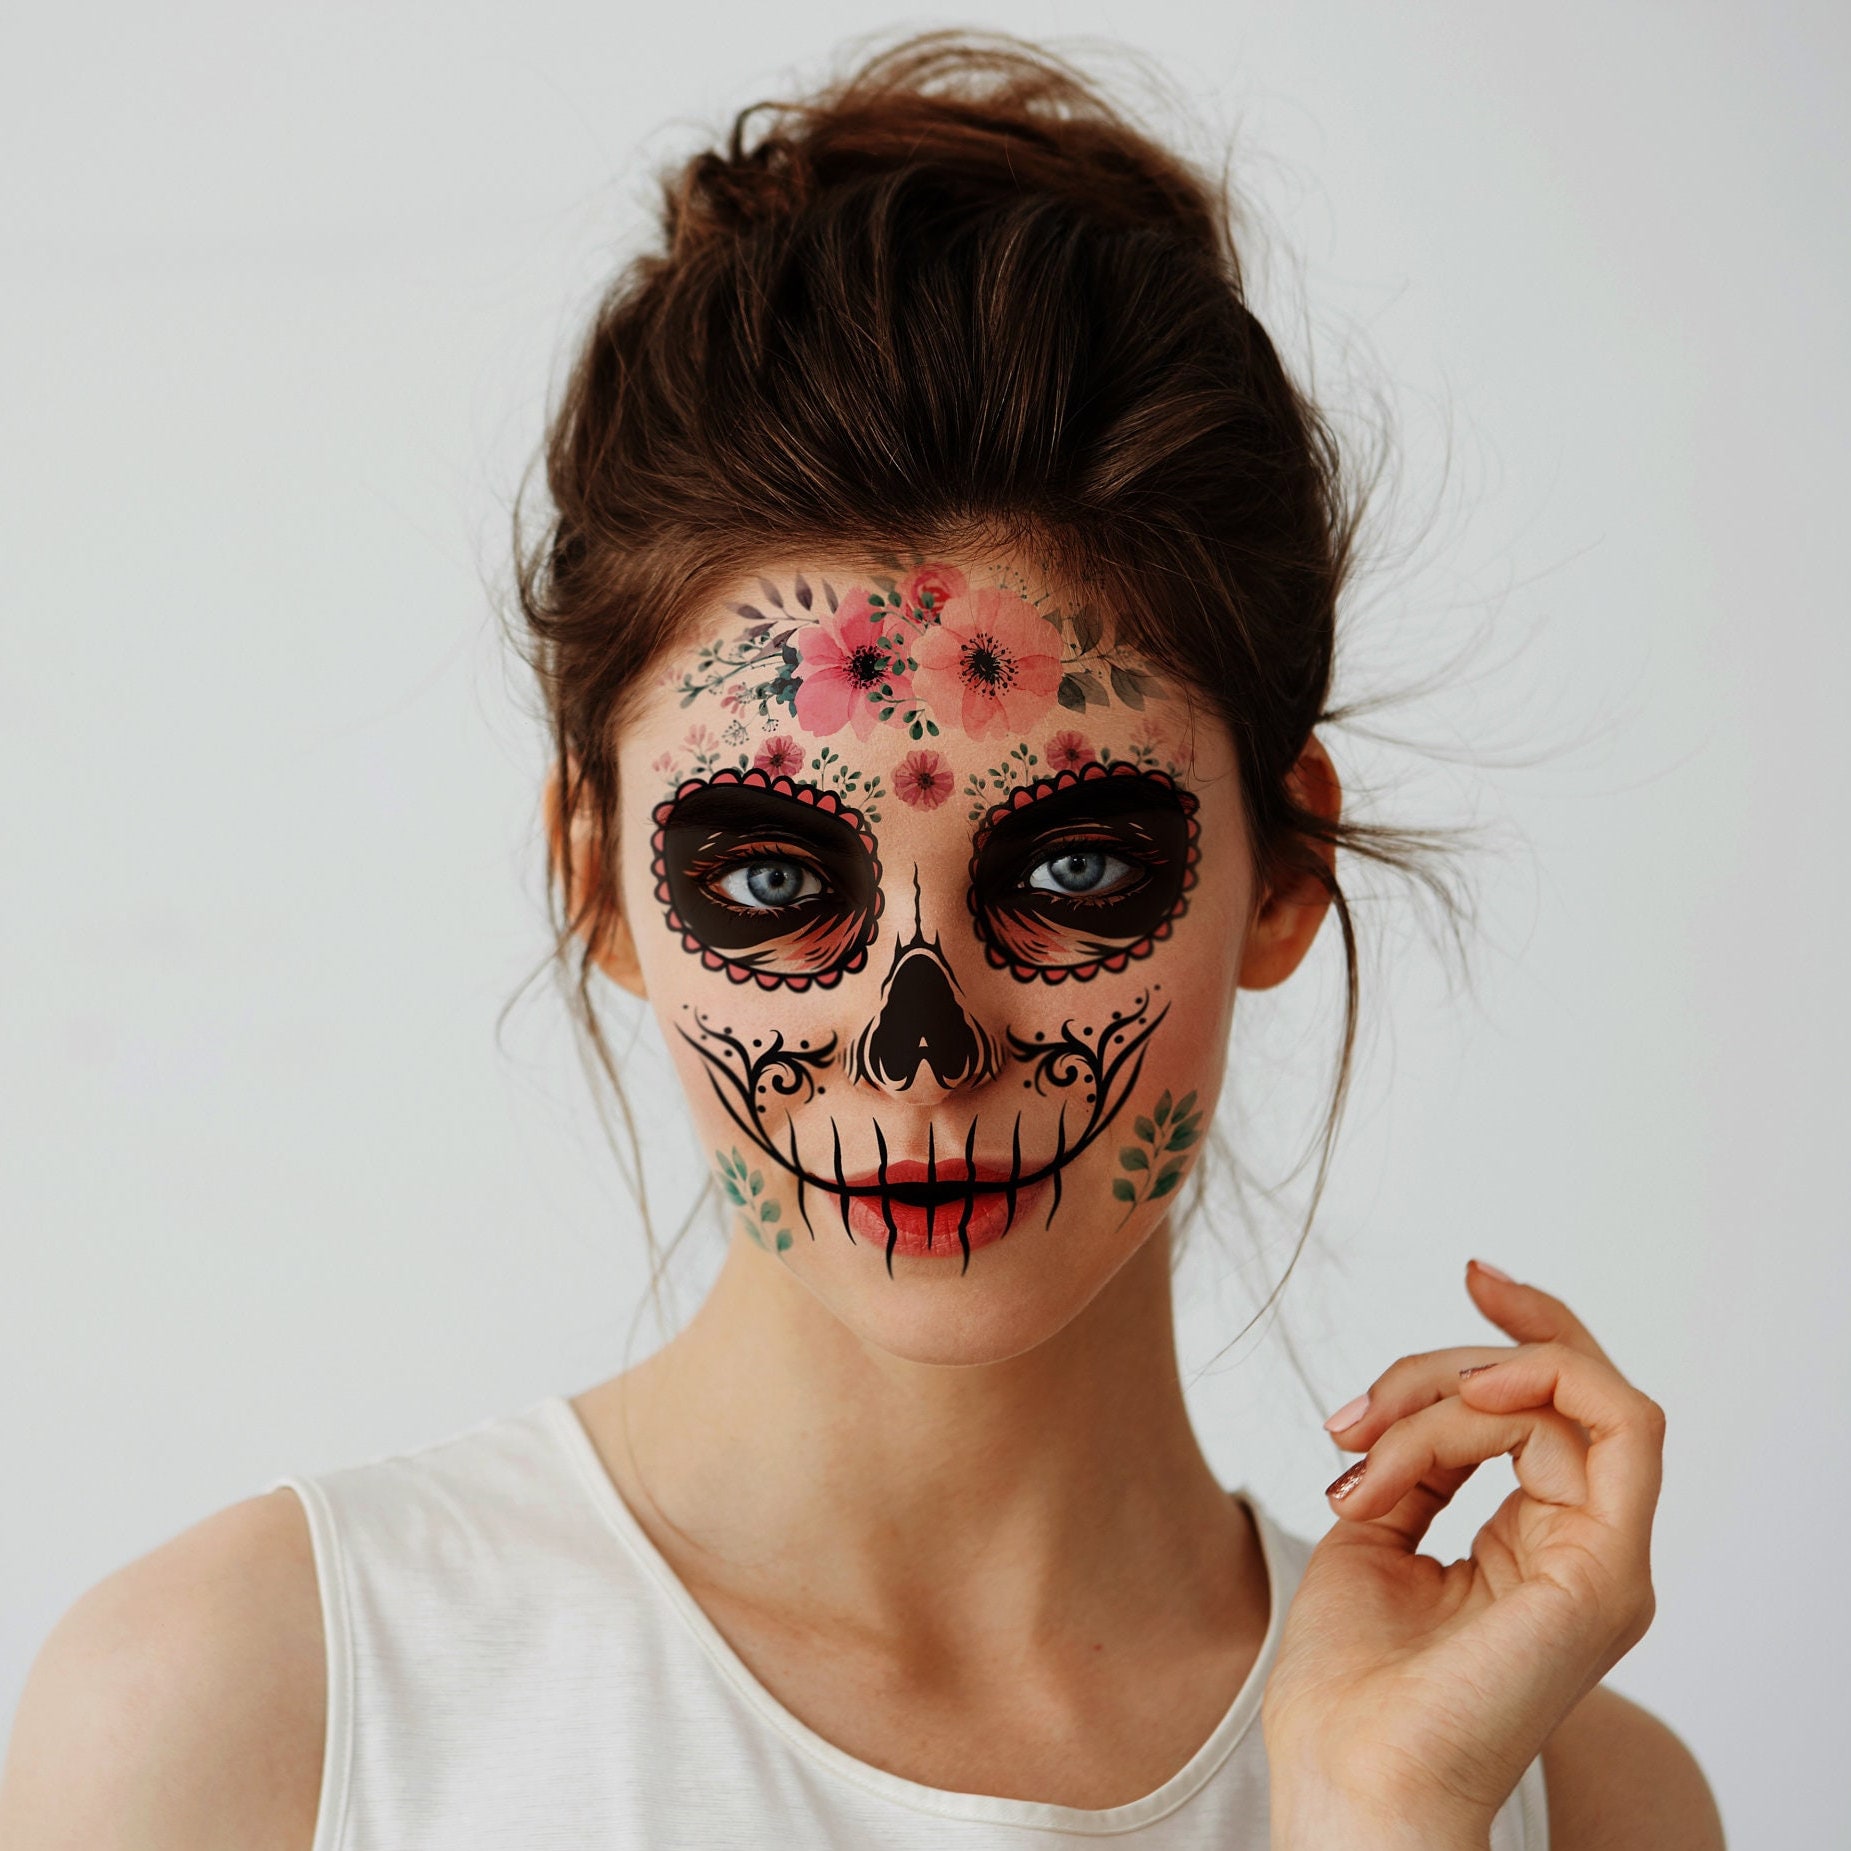 Supperb Halloween Face Tattoo Day of the Dead Sugar Skull